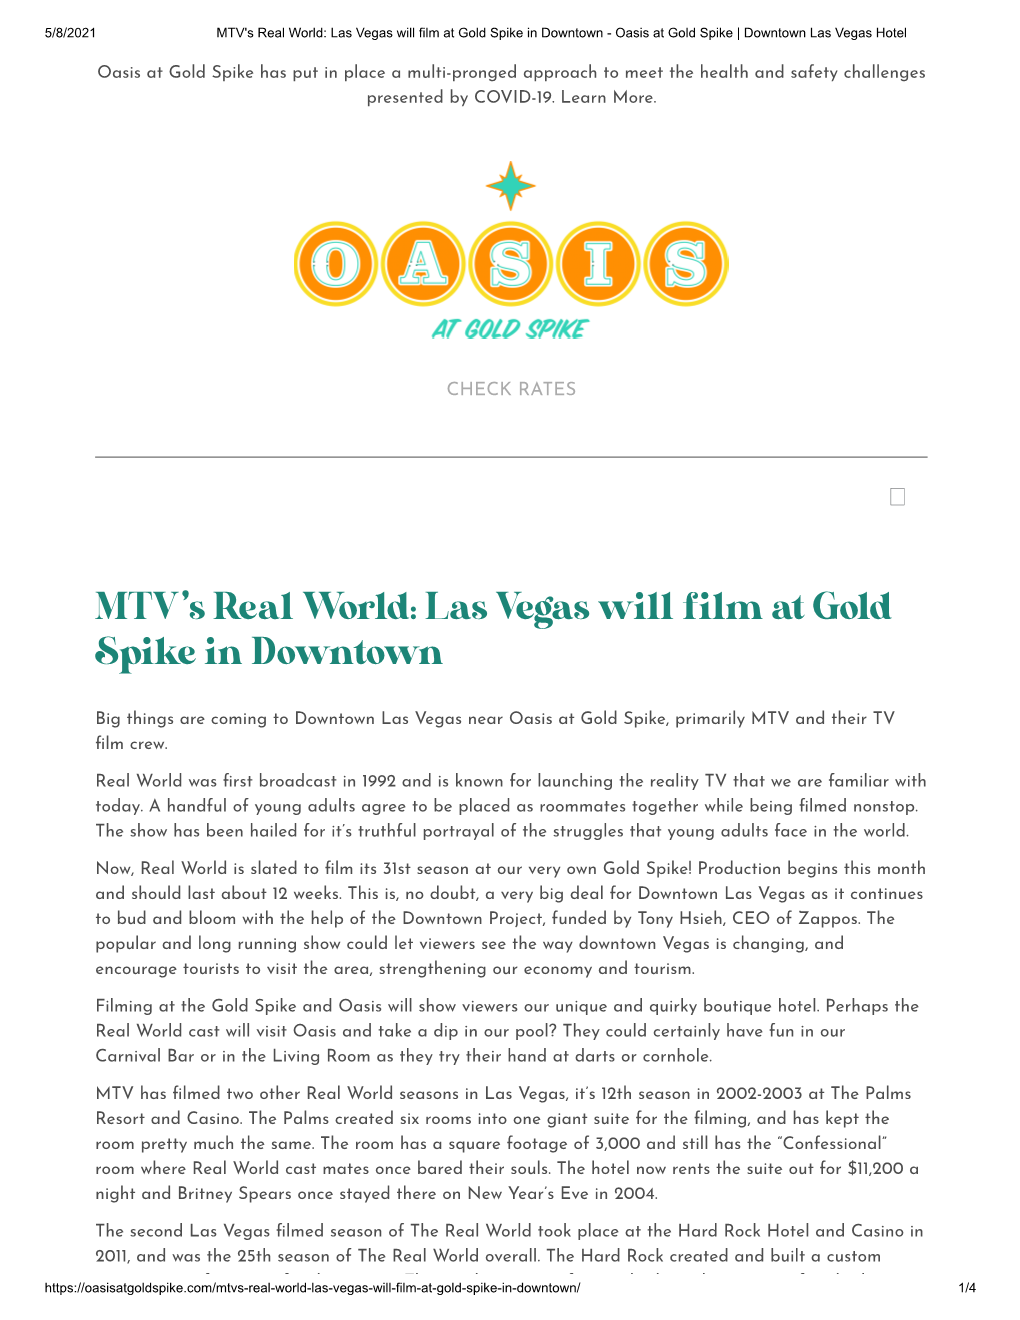 Las Vegas Will Film at Gold Spike in Downtown - Oasis at Gold Spike | Downtown Las Vegas Hotel